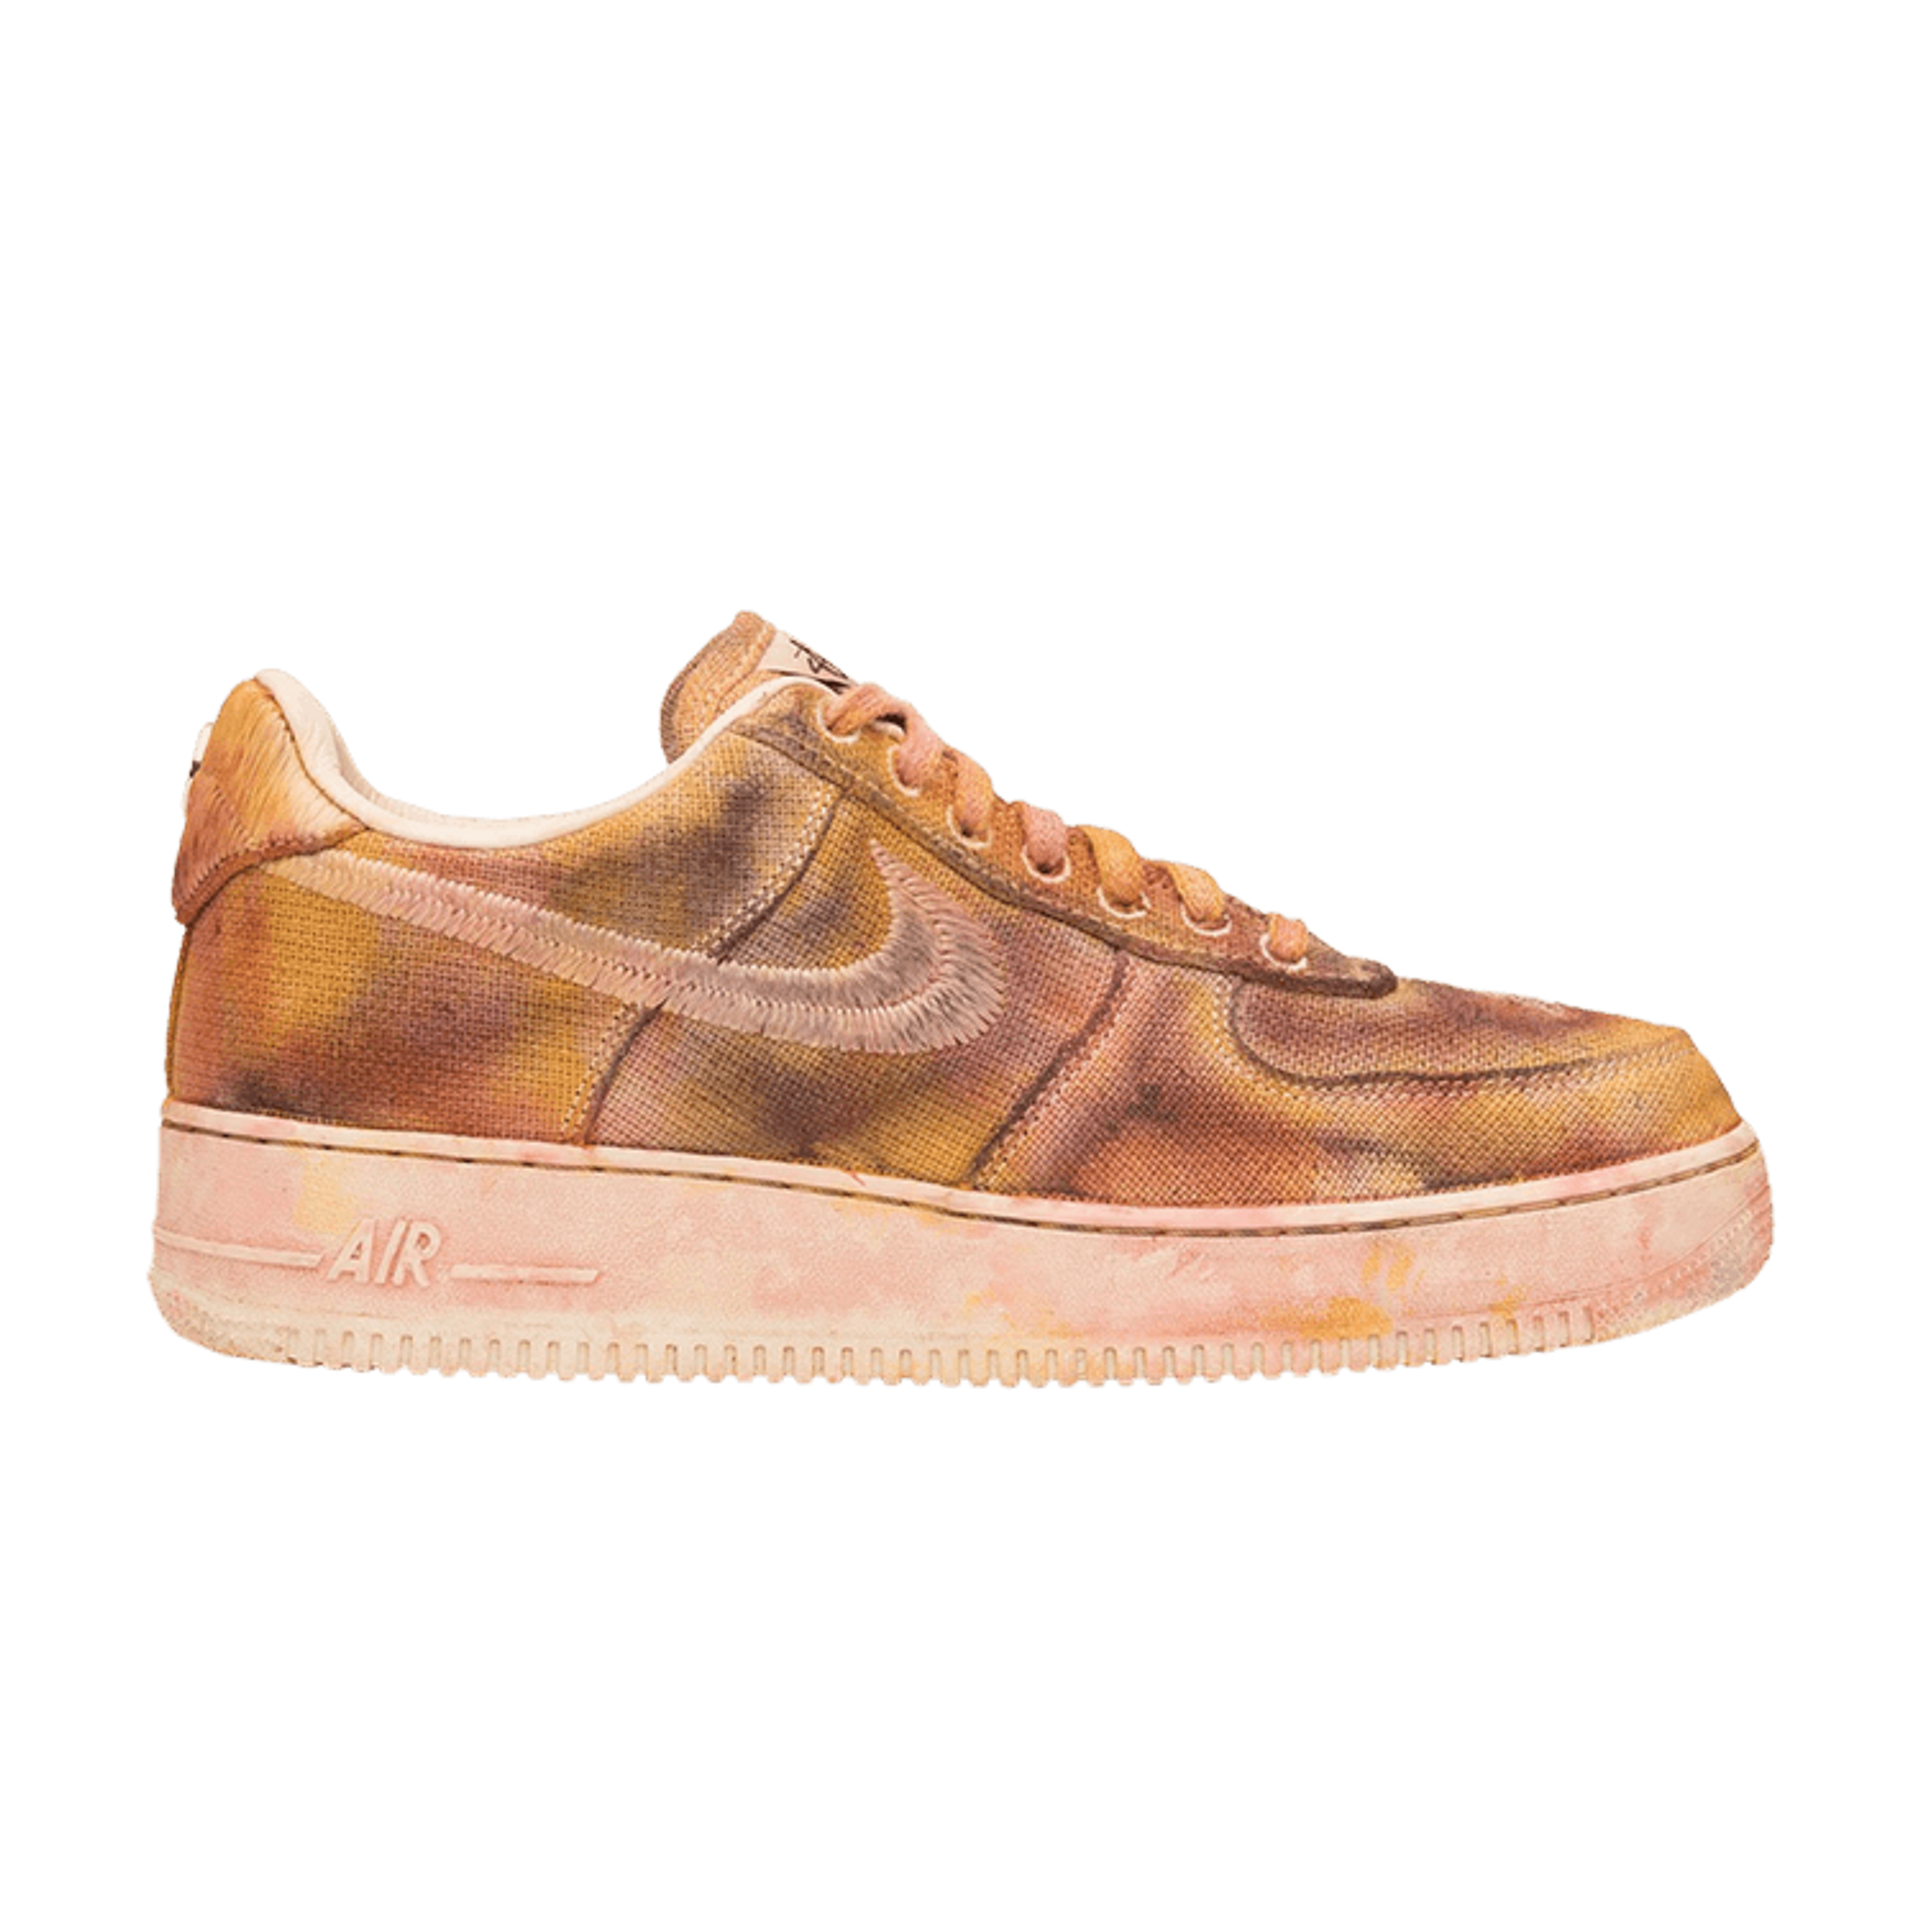 Stussy x Lookout & Wonderland x Nike Air Force 1 Low 'Hand Dyed - New York'